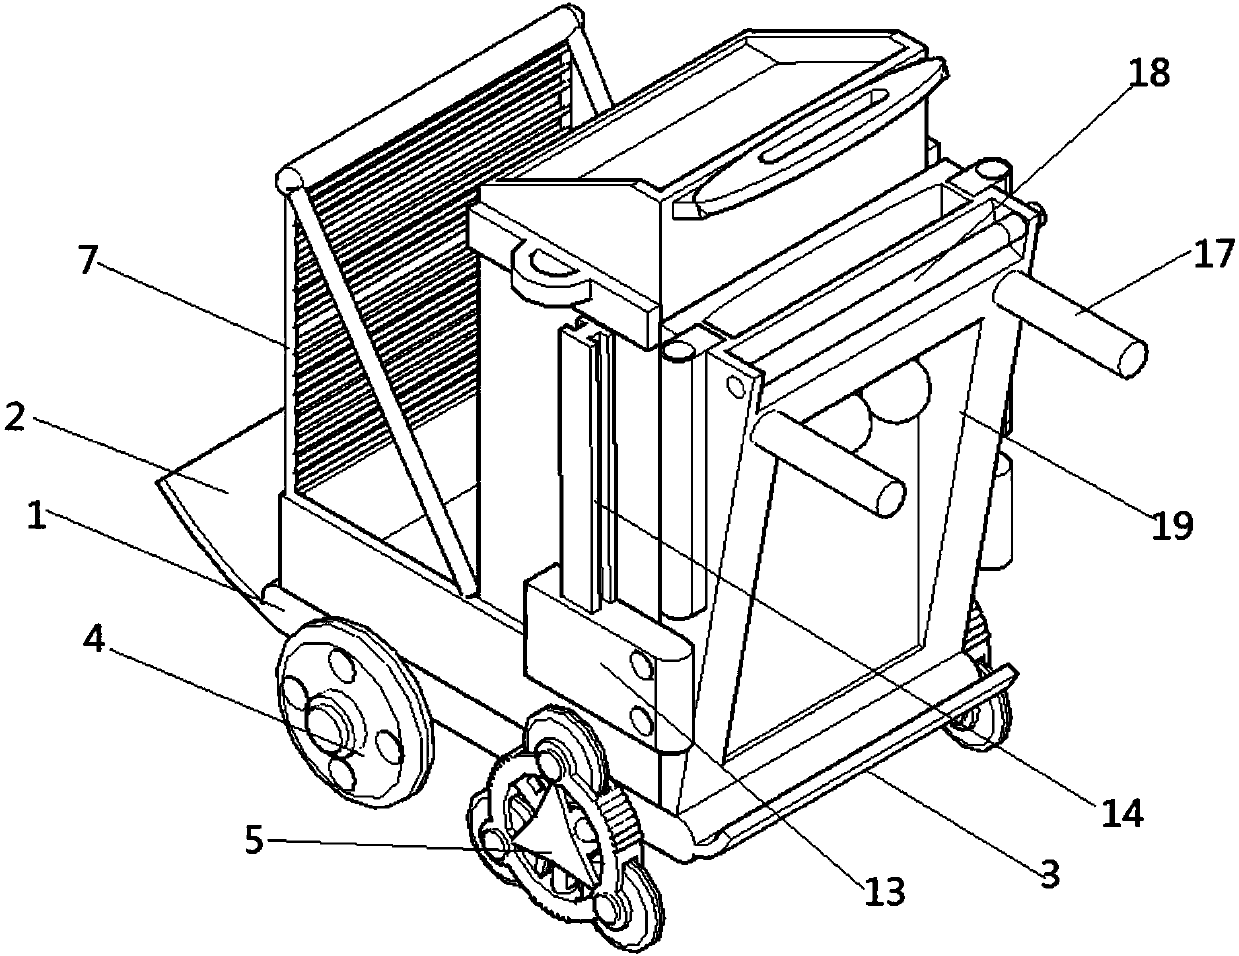 Hand-push type cleaning vehicle device for property cleaning